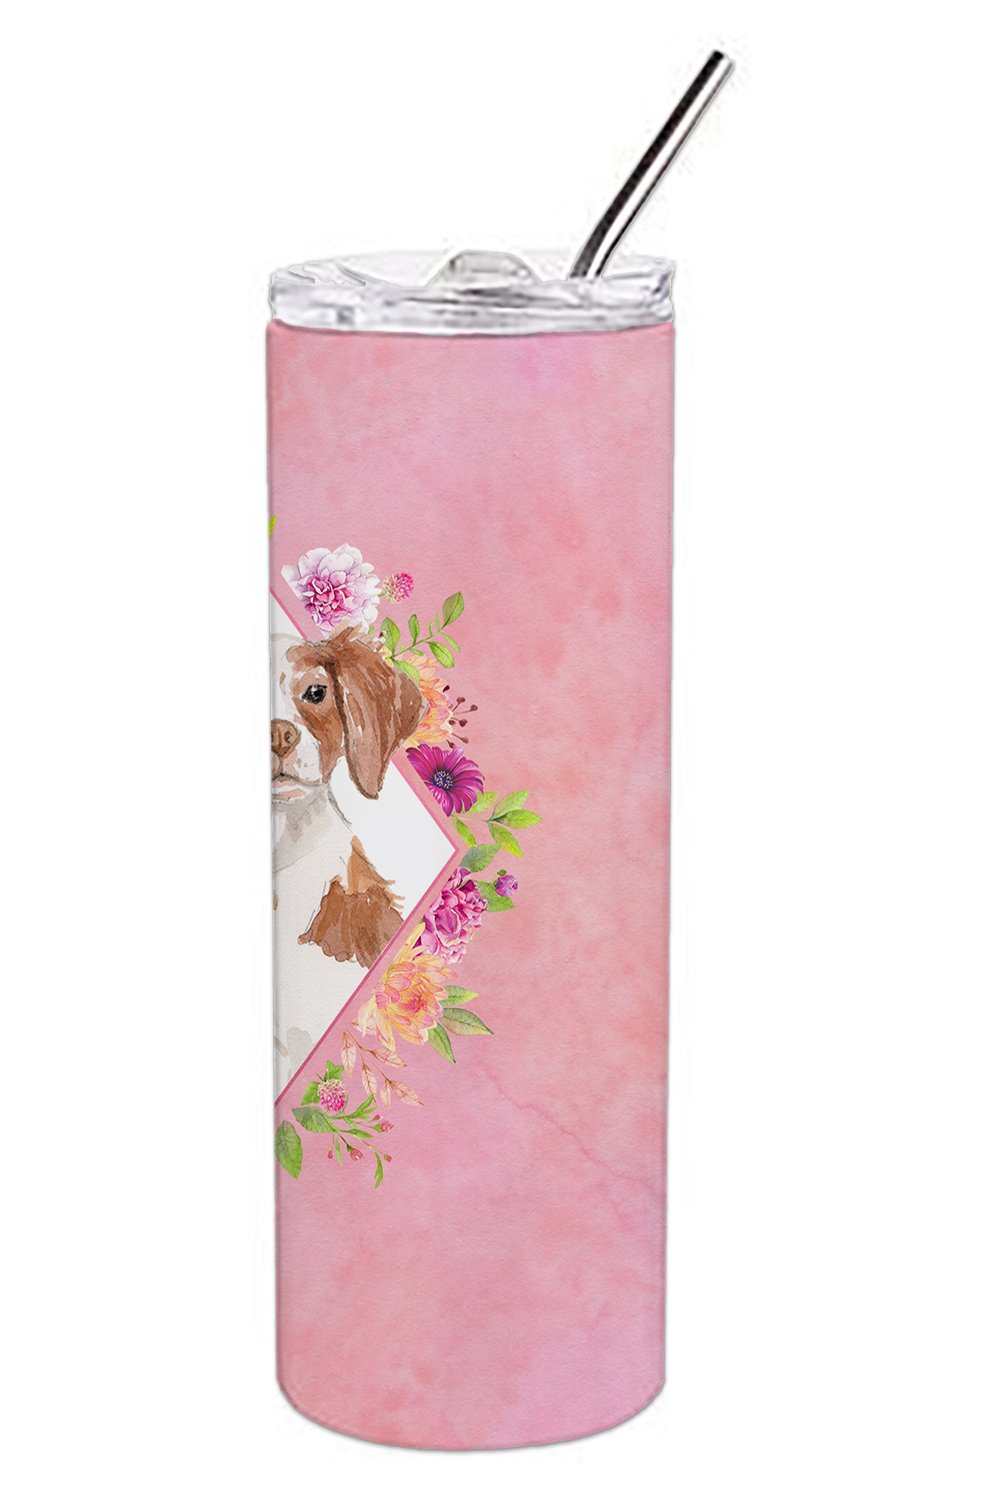 Brittany Spaniel Pink Flowers Double Walled Stainless Steel 20 oz Skinny Tumbler CK4254TBL20 by Caroline's Treasures